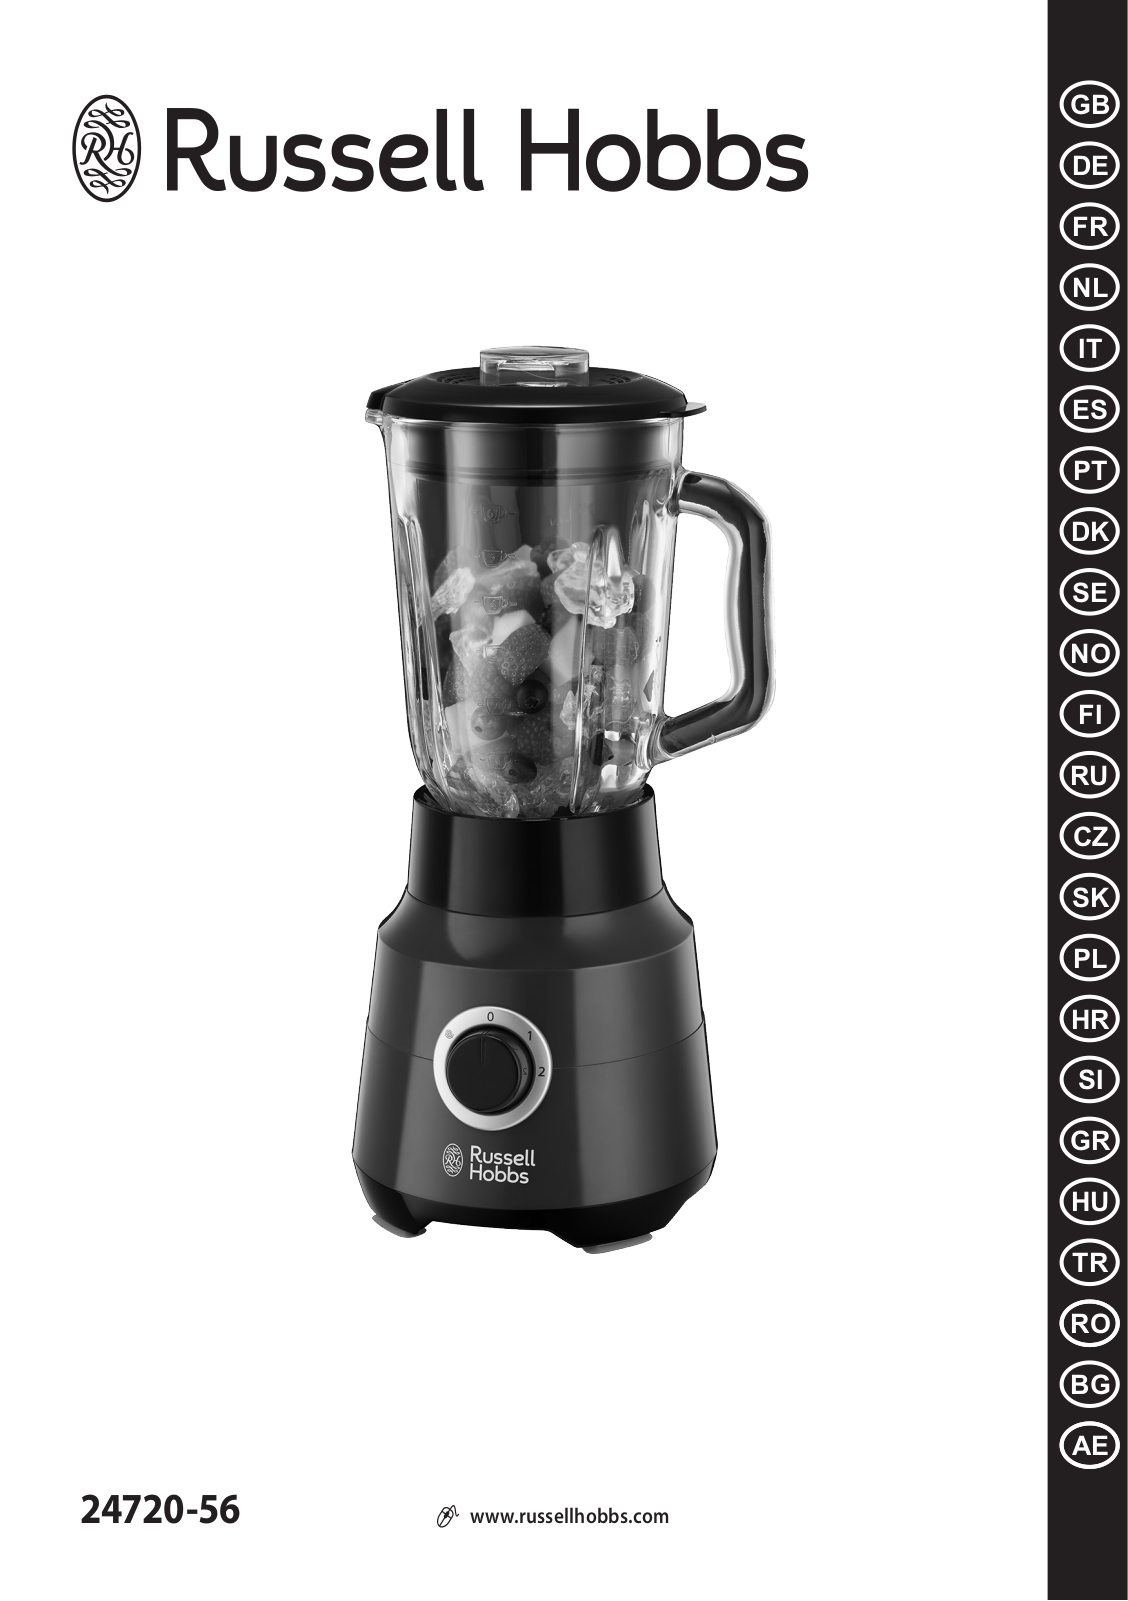 RUSSELL HOBBS 24720-56 operation manual